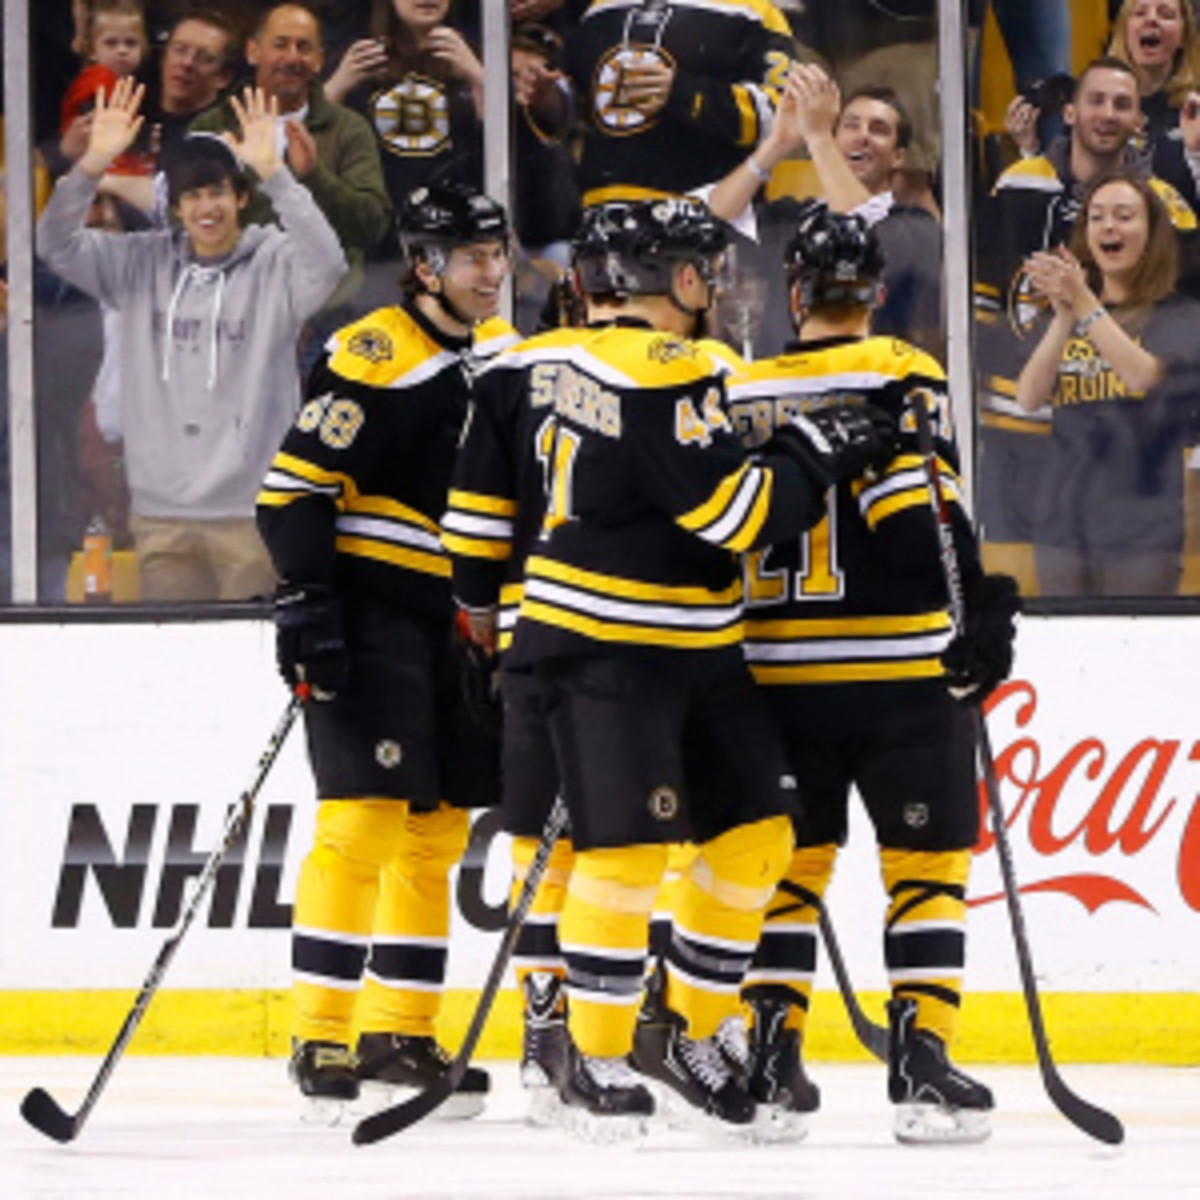 The Bruins play in Boston on Wednesday night for the first time since the marathon bombings. (Jared Wickersham/Getty Images)